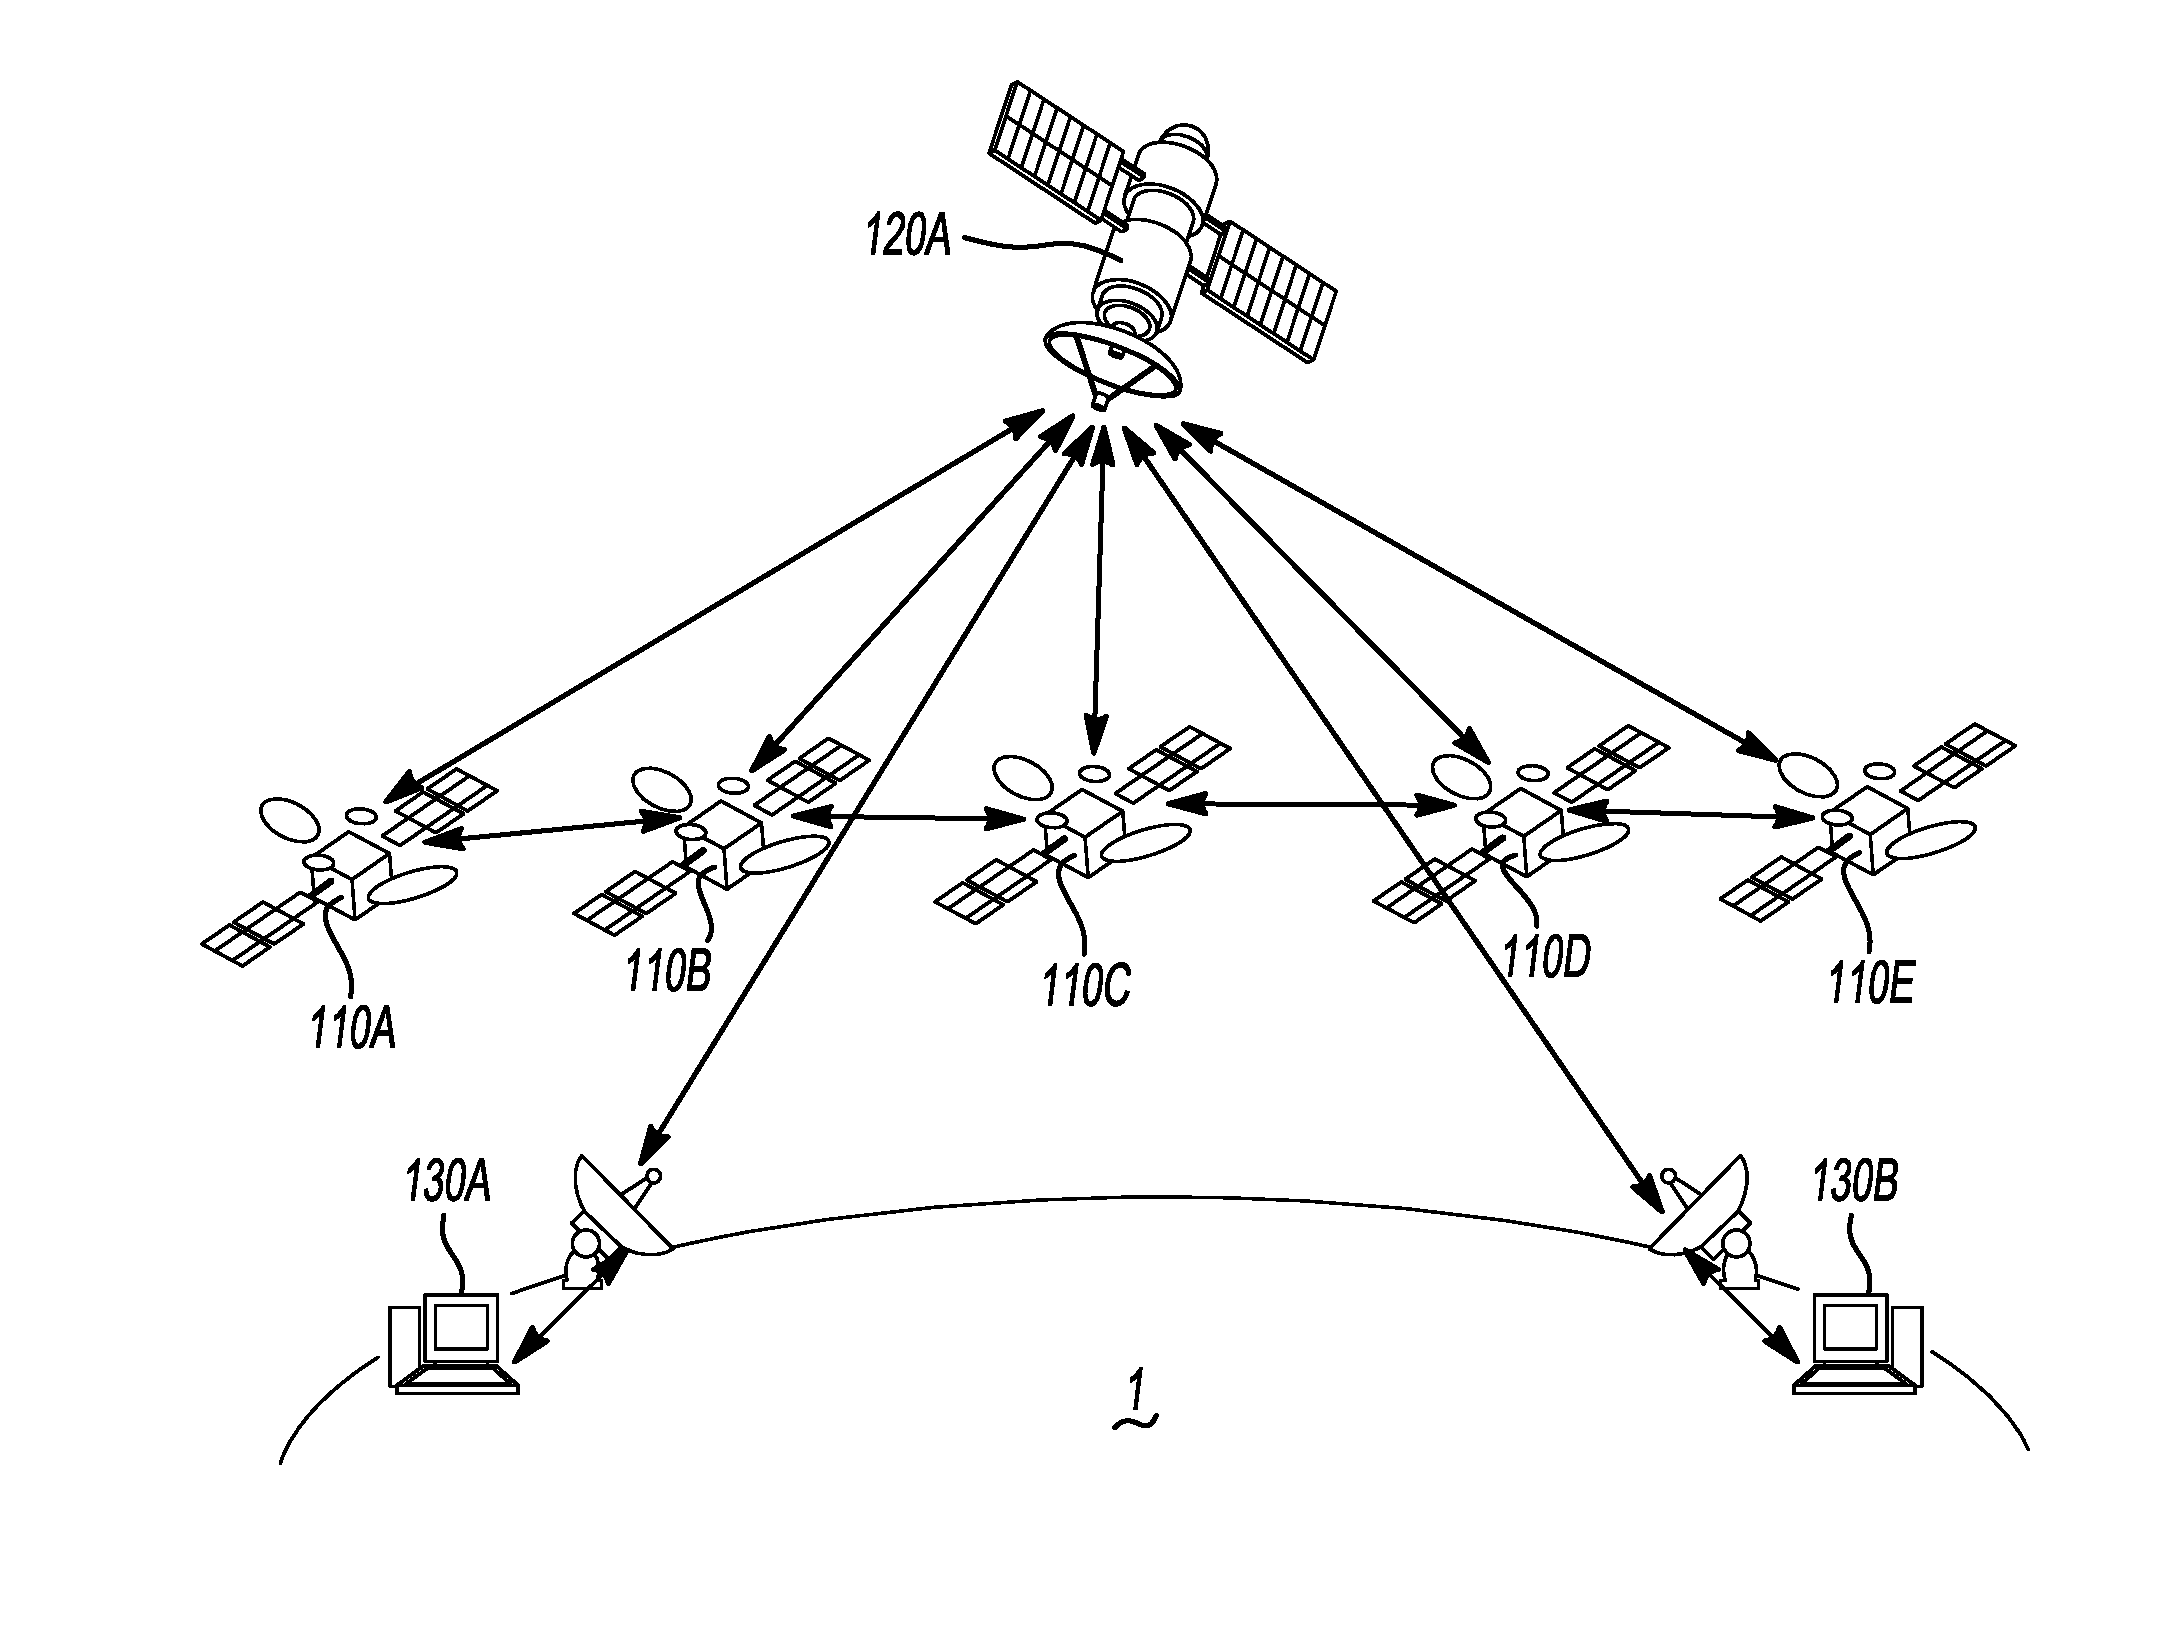 Space-based electronic data storage and transfer network system